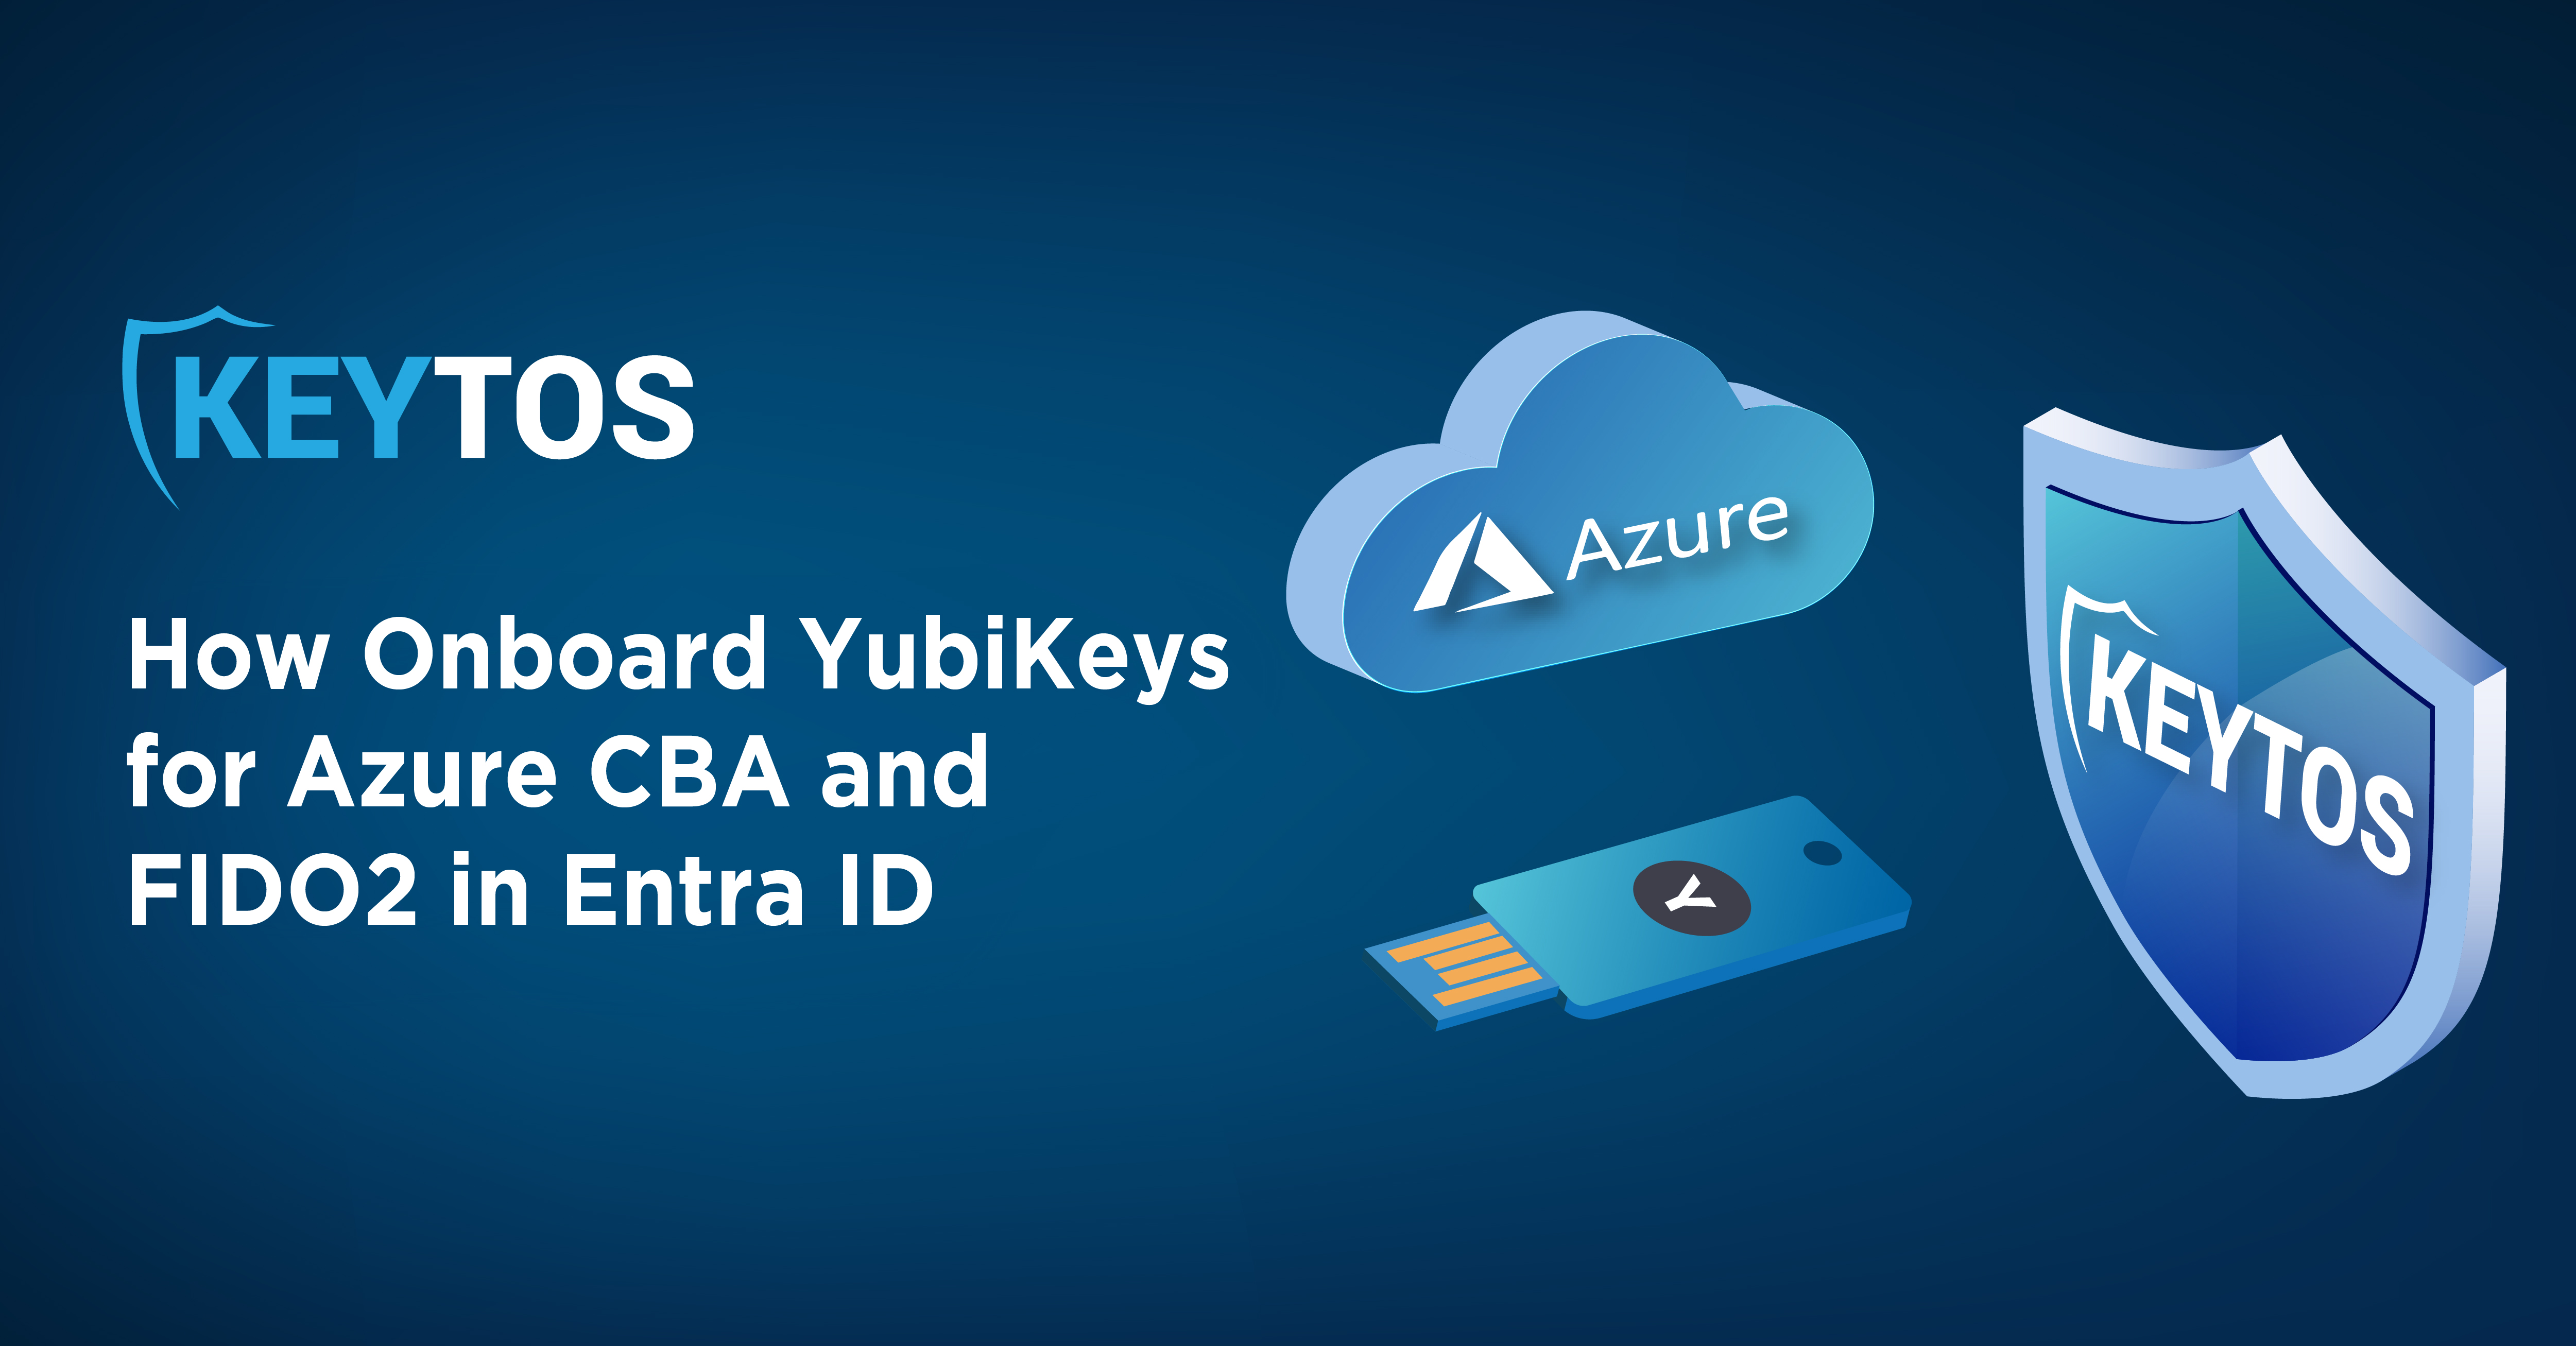 How To Onboard YubiKeys for Azure CBA and FIDO2 in Entra ID